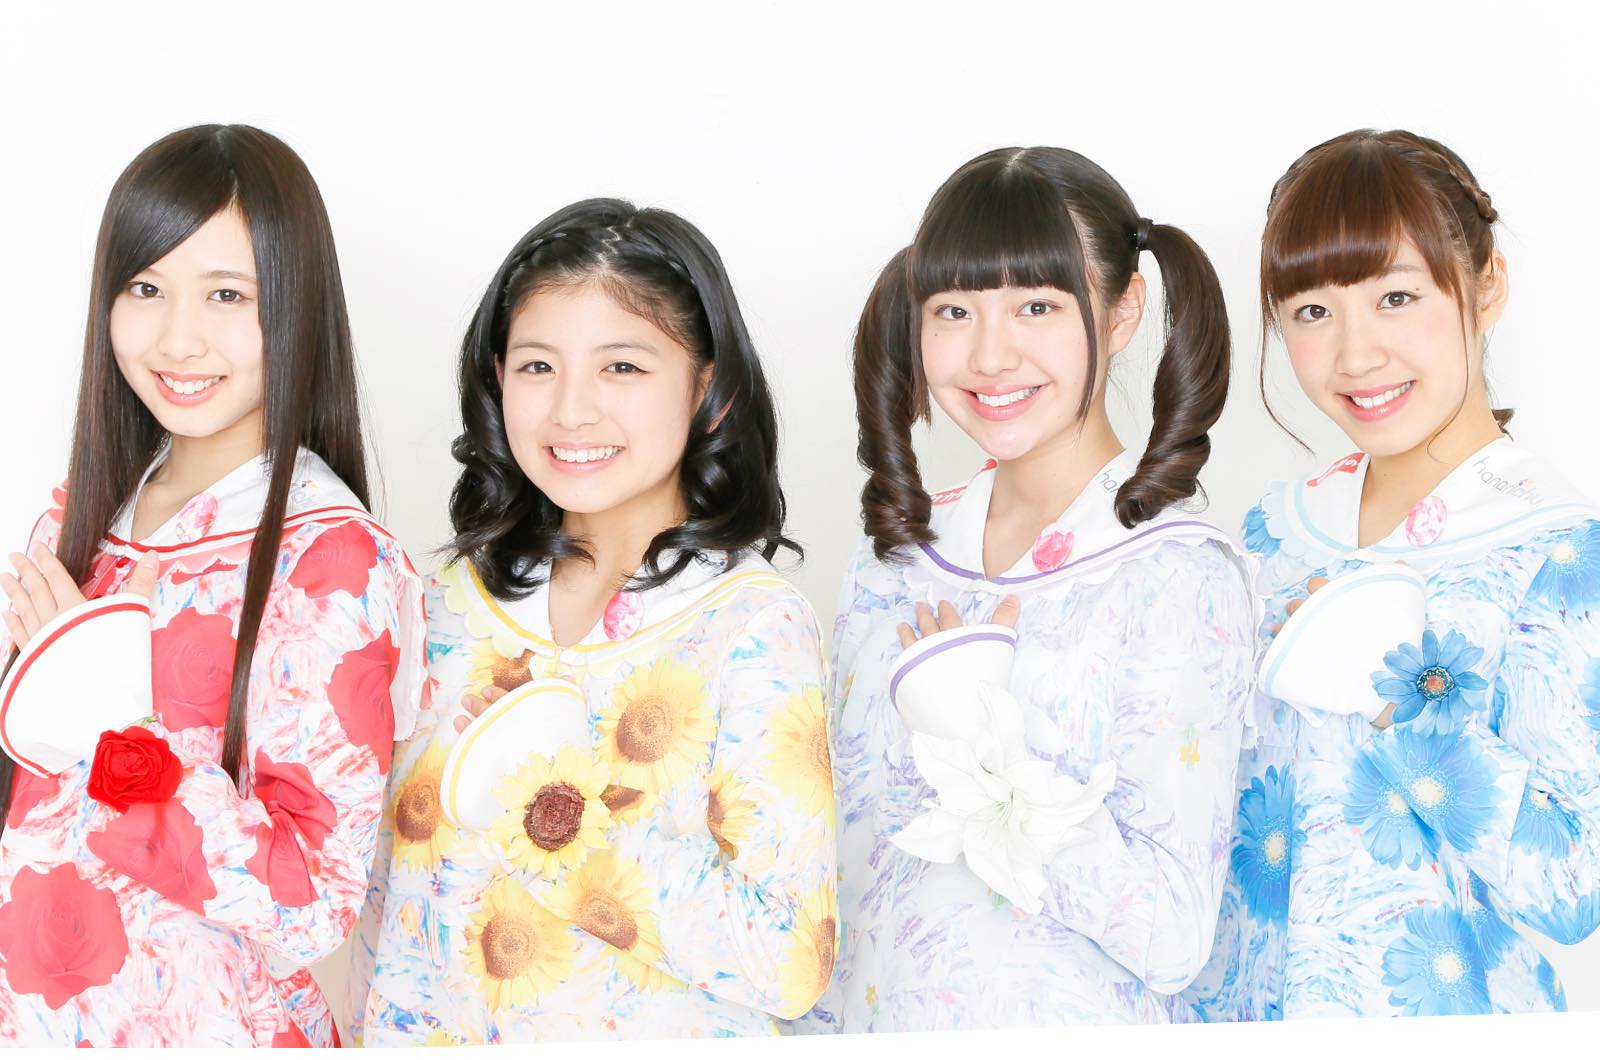 What Happens After Flowers Bloom? hanarichu’s Final Live Announced!